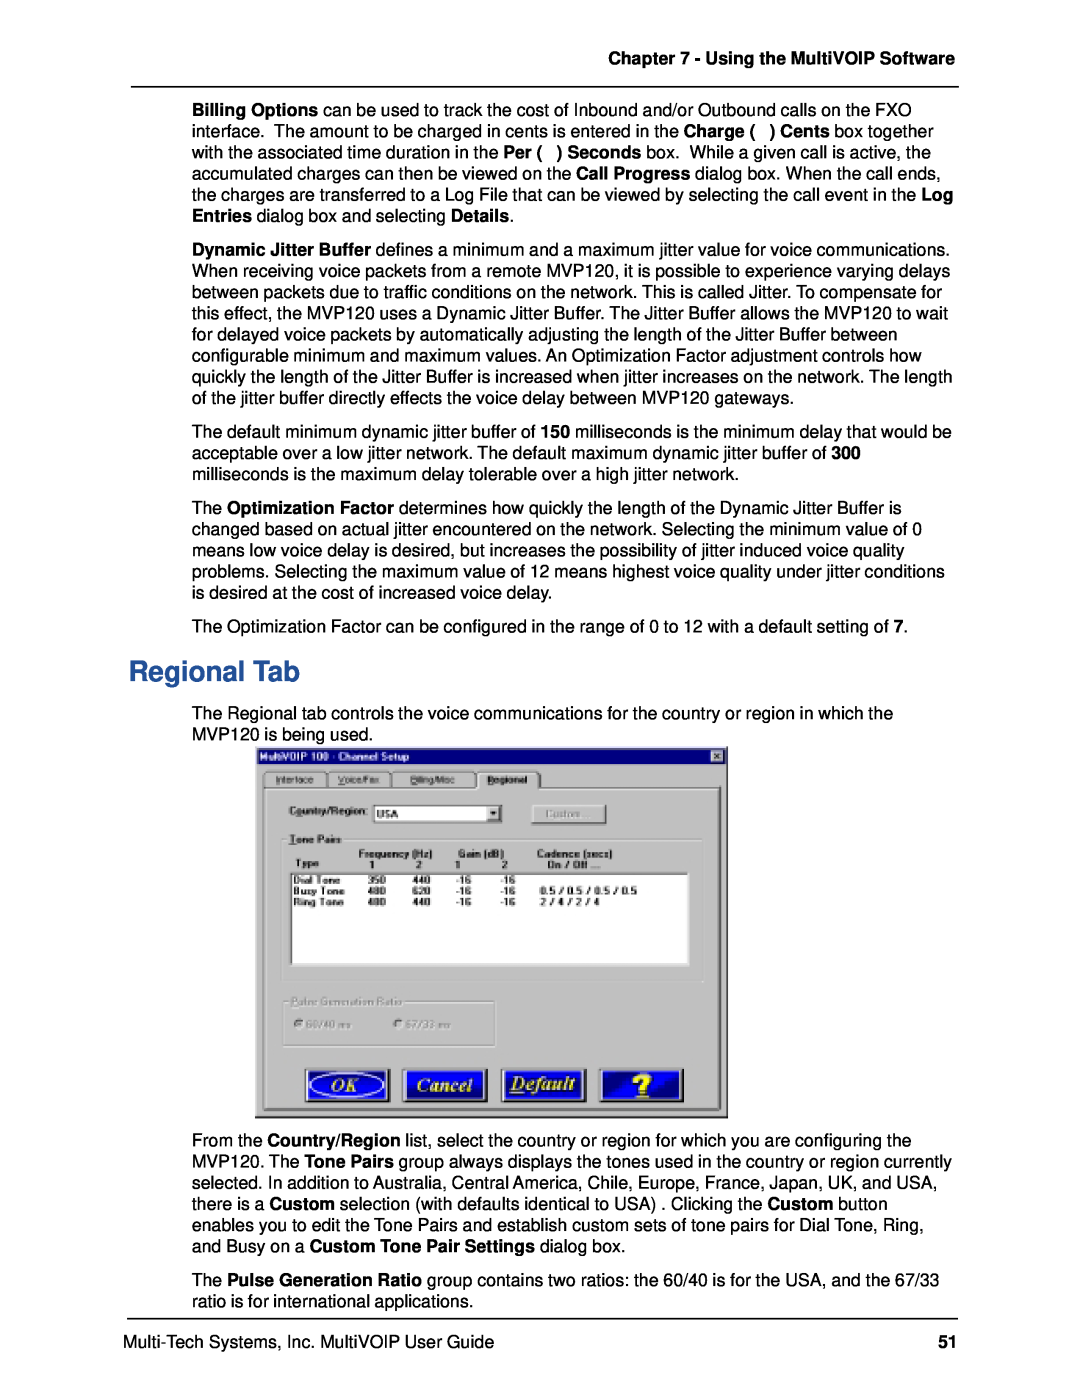 Multi-Tech Systems MVP120 manual Regional Tab, Using the MultiVOIP Software 